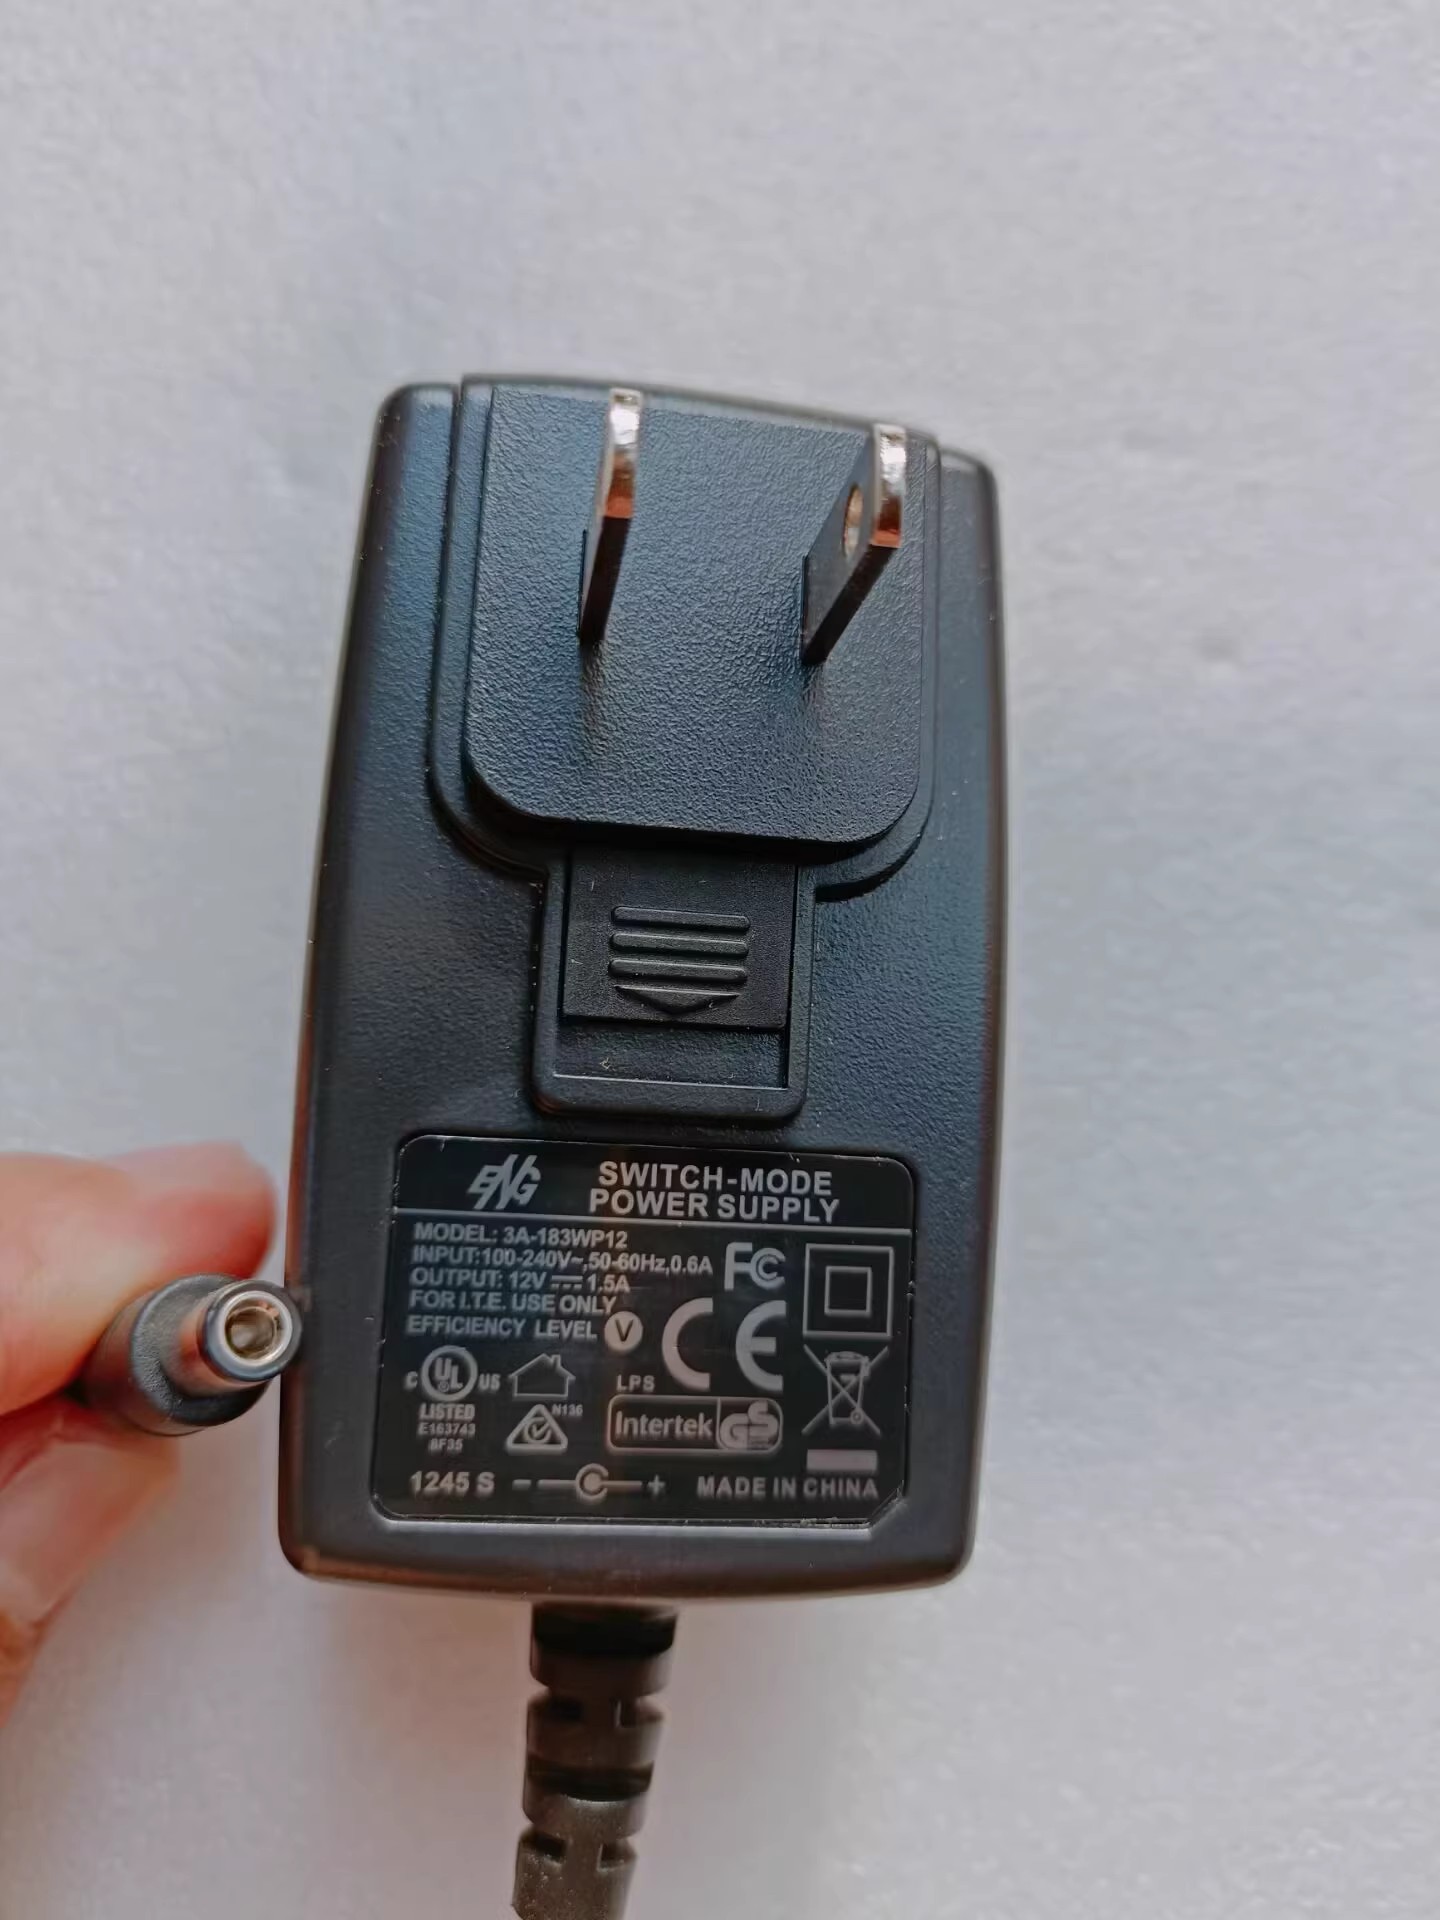 *Brand NEW* ENG 12V 1.5A AC DC ADAPTHE 3A-183WP12 POWER Supply